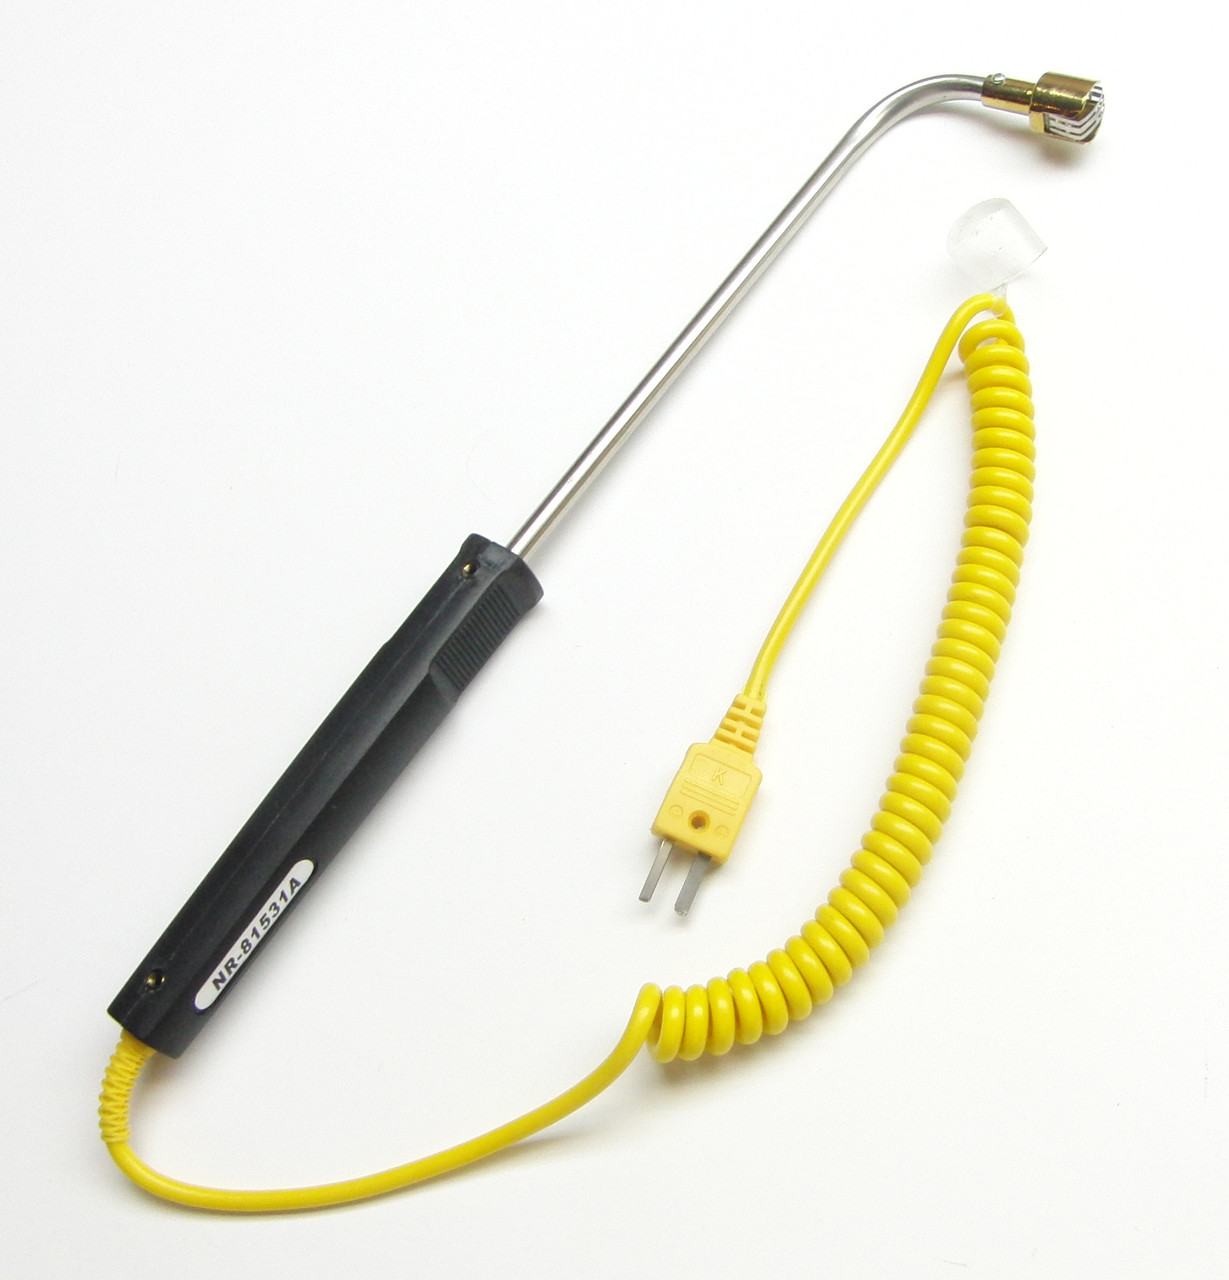 Buy a K-type thermocouple thermometer DM6801 with high temperature probe  PK-1000